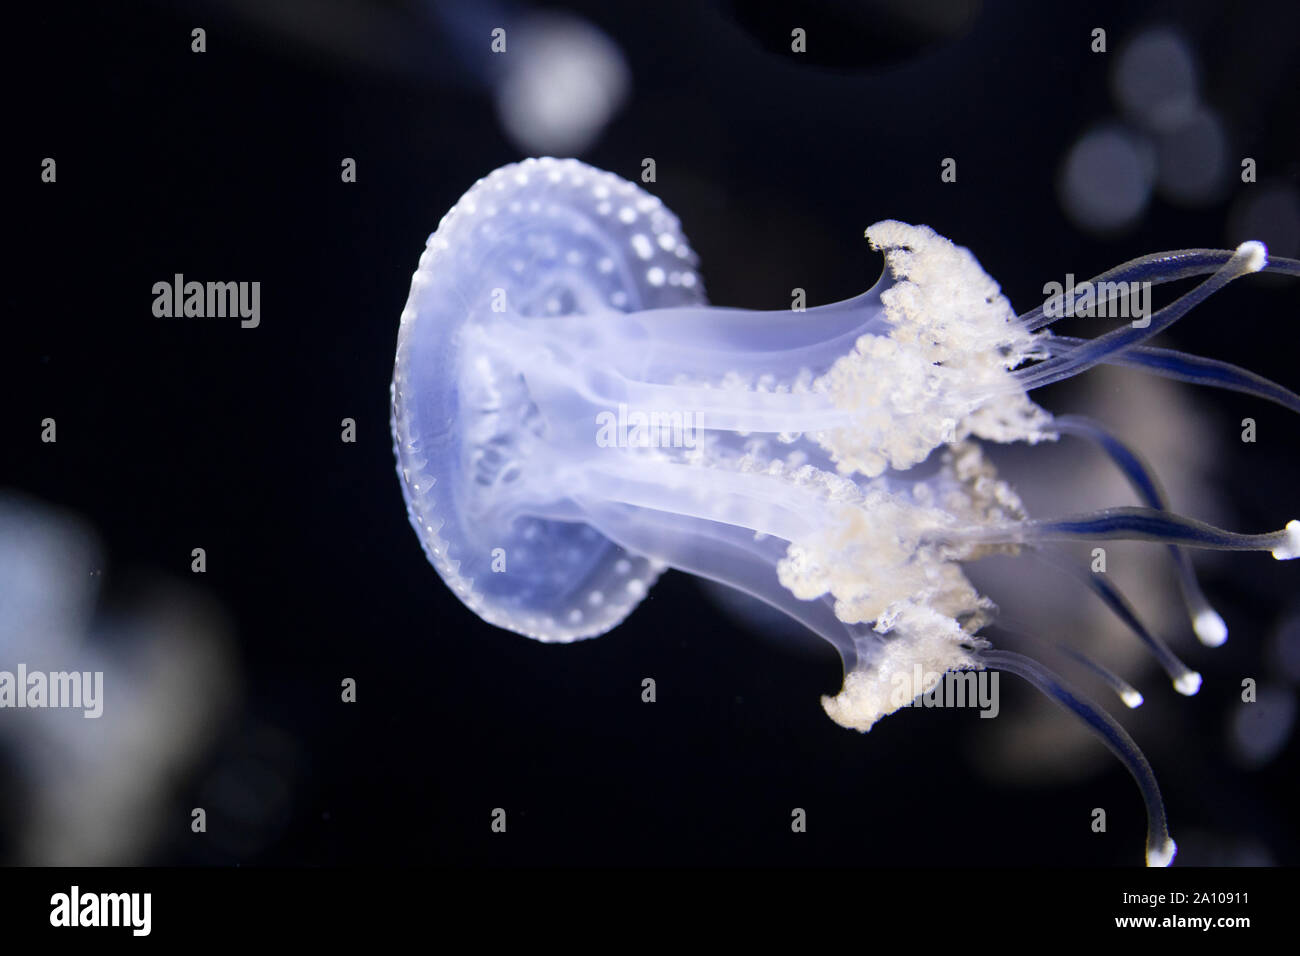 White-spotted jellyfish (Phyllorhiza punctata), also known as floating bell or Australian spotted jellyfish. In some areas it is considered invasive. Stock Photo